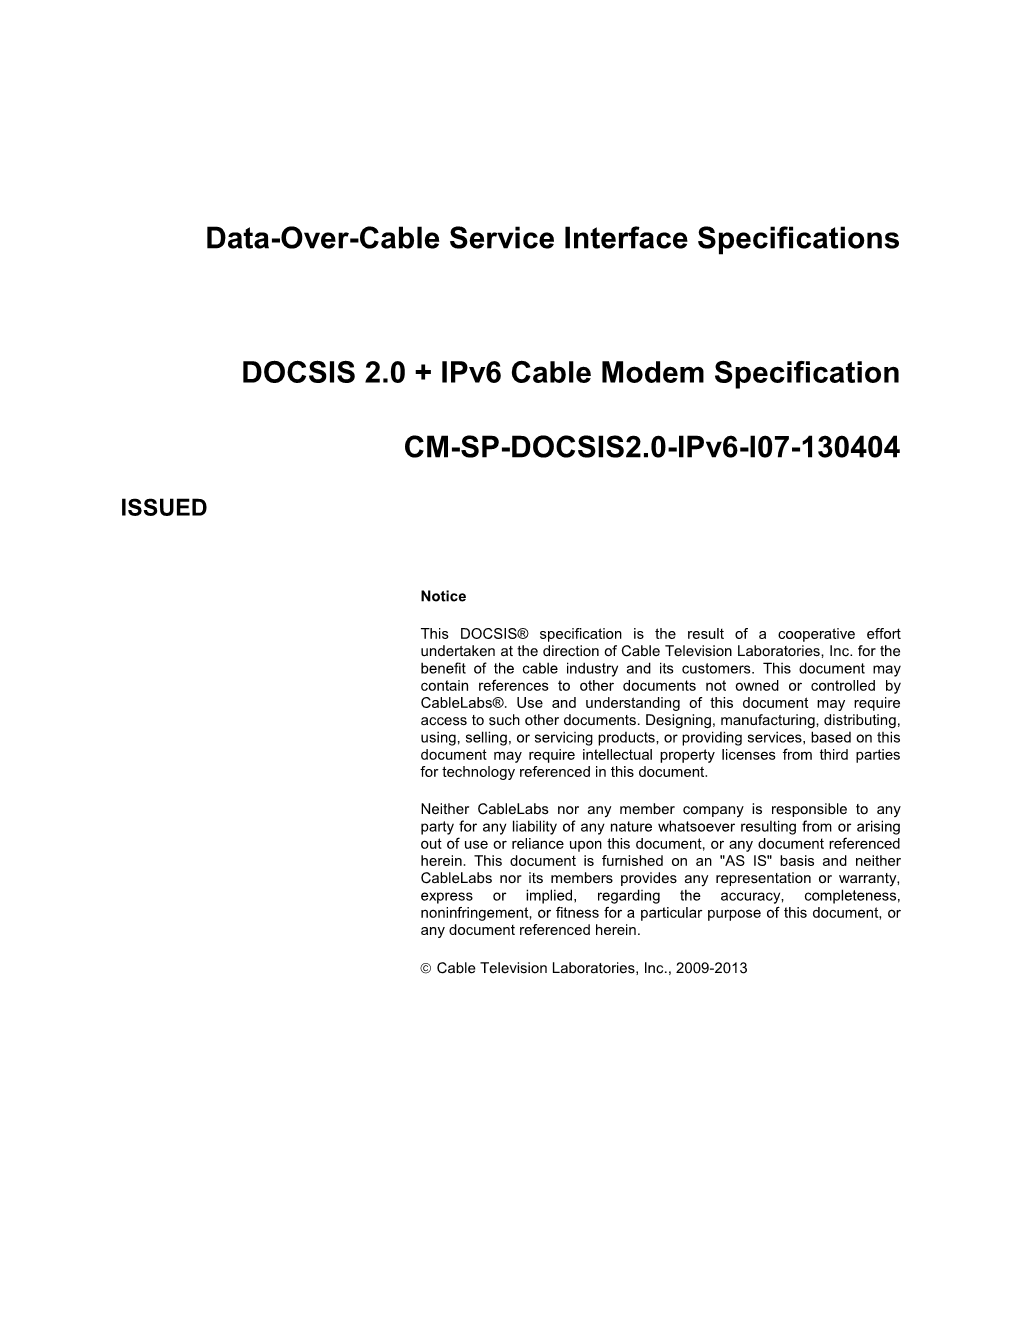 Data-Over-Cable Service Interface Specifications DOCSIS 2.0 + Ipv6 Cable Modem Specification CM-SP-DOCSIS2.0-Ipv6-I07-130404